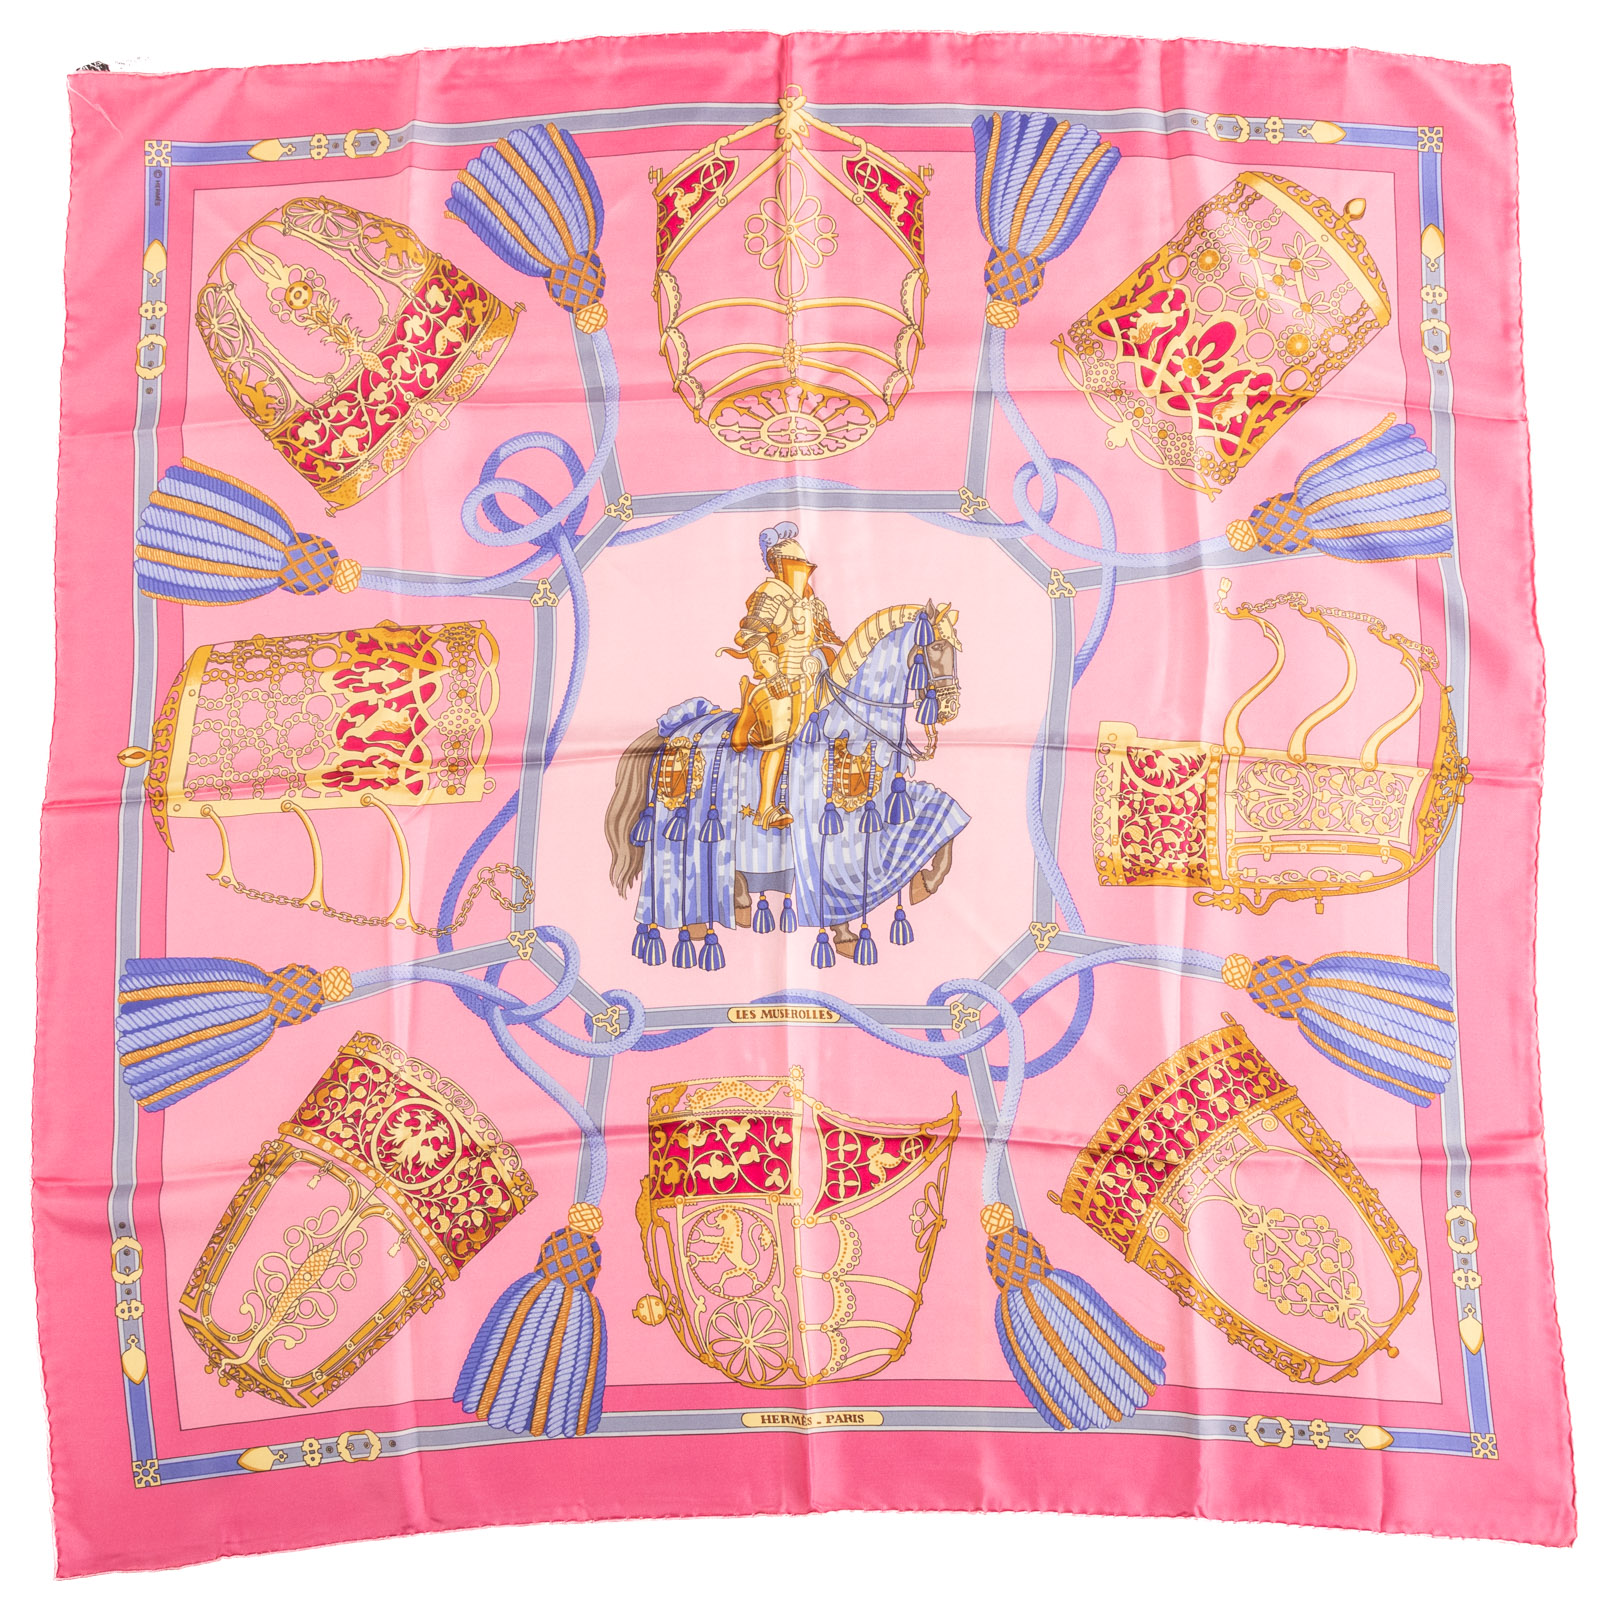 AN HERMES "LES MUSEROLLES" SCARF